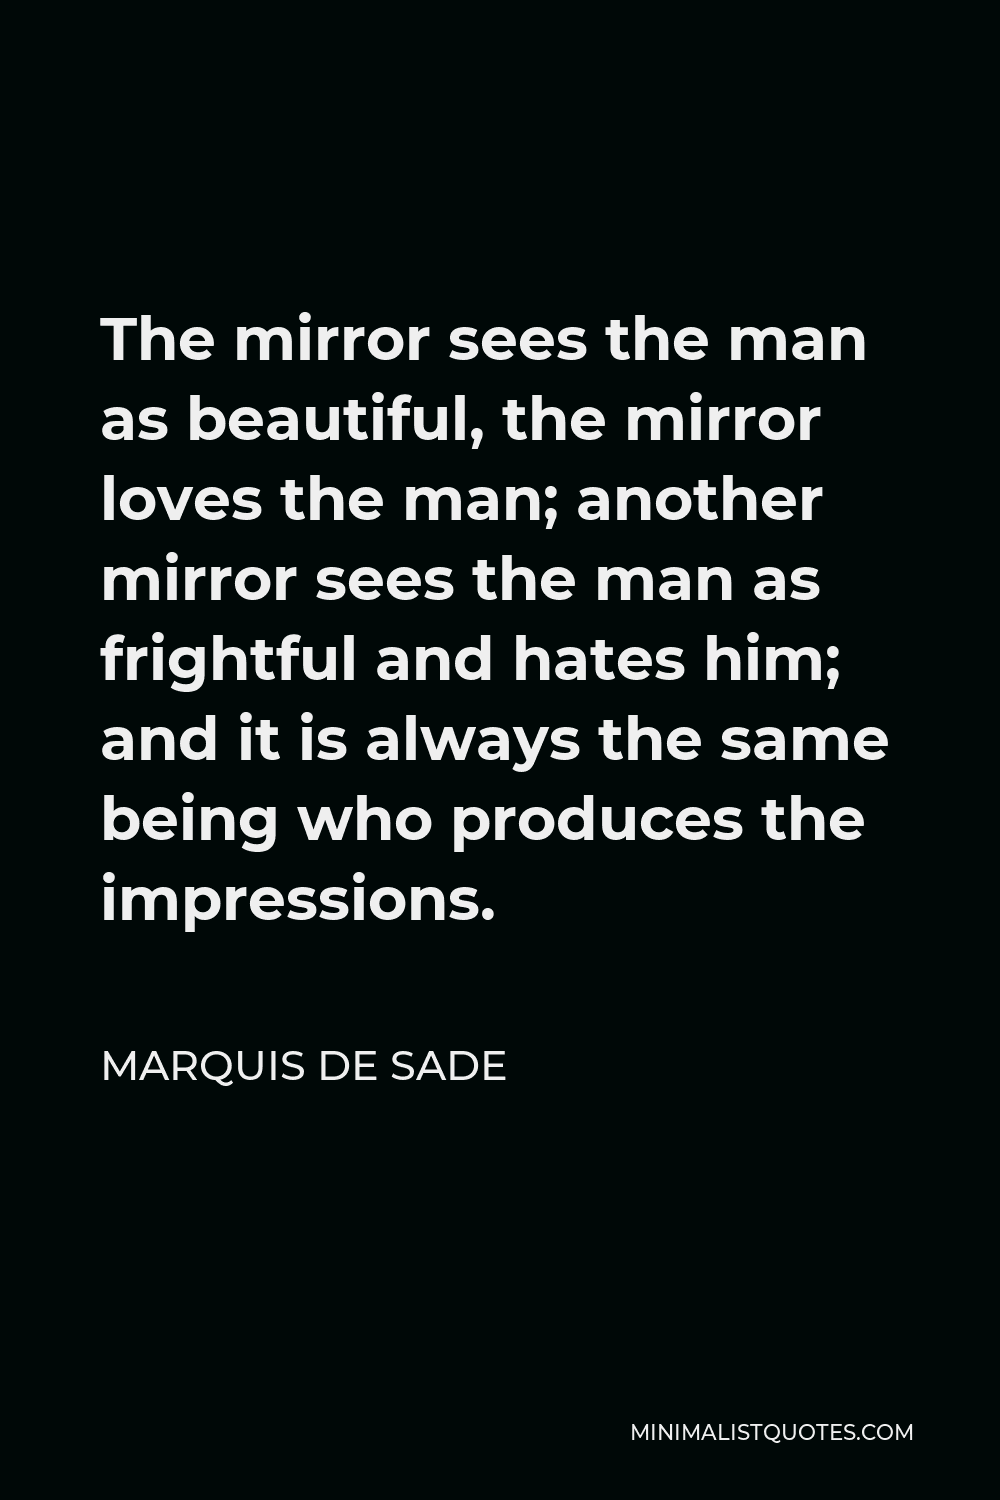 Marquis de Sade Quote - The mirror sees the man as beautiful, the mirror loves the man; another mirror sees the man as frightful and hates him; and it is always the same being who produces the impressions.